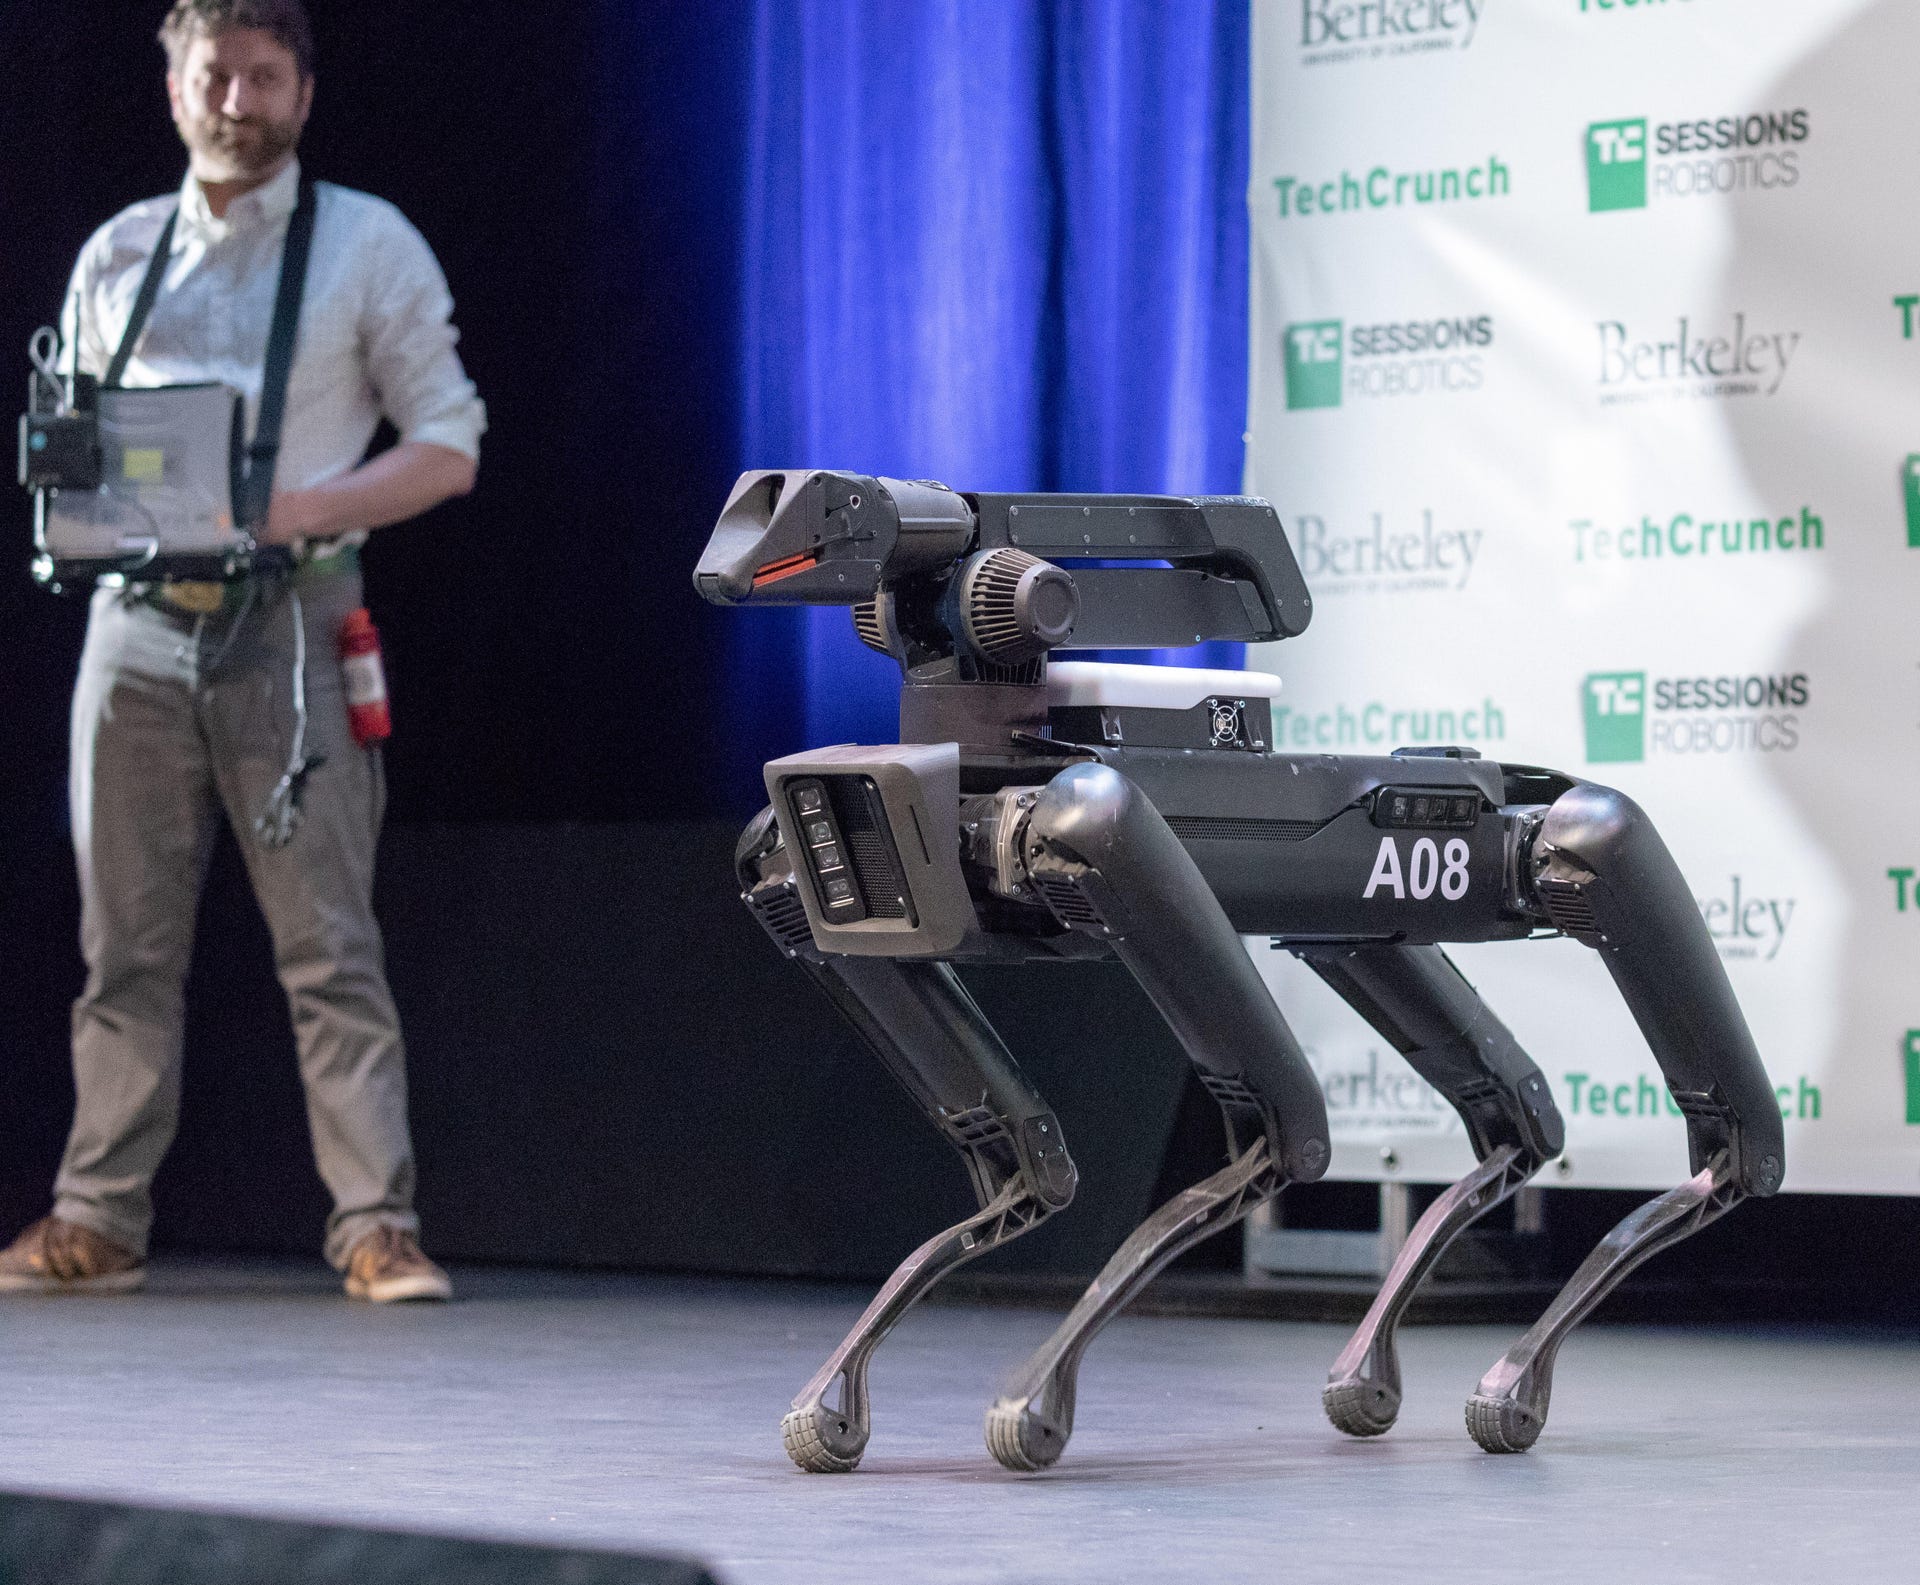 A human operator pilots a Boston Dynamics SpotMini quadrupedal robot, giving commands about where to go but not how exactly to position its legs.